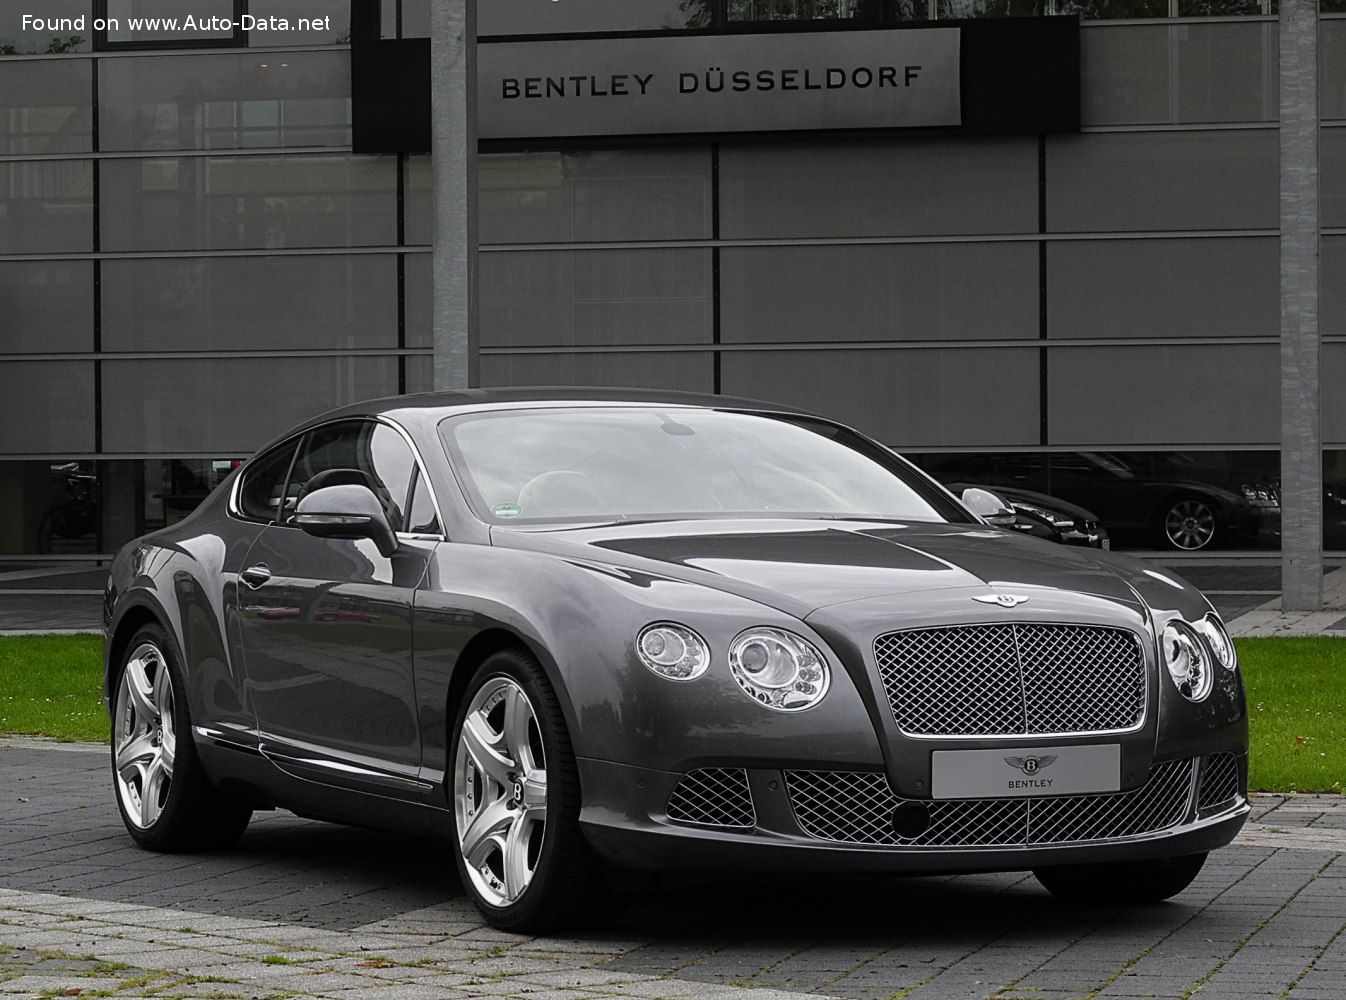 2014 Bentley Continental GT GT Stock # 87735 for sale near Chicago, IL | IL  Bentley Dealer